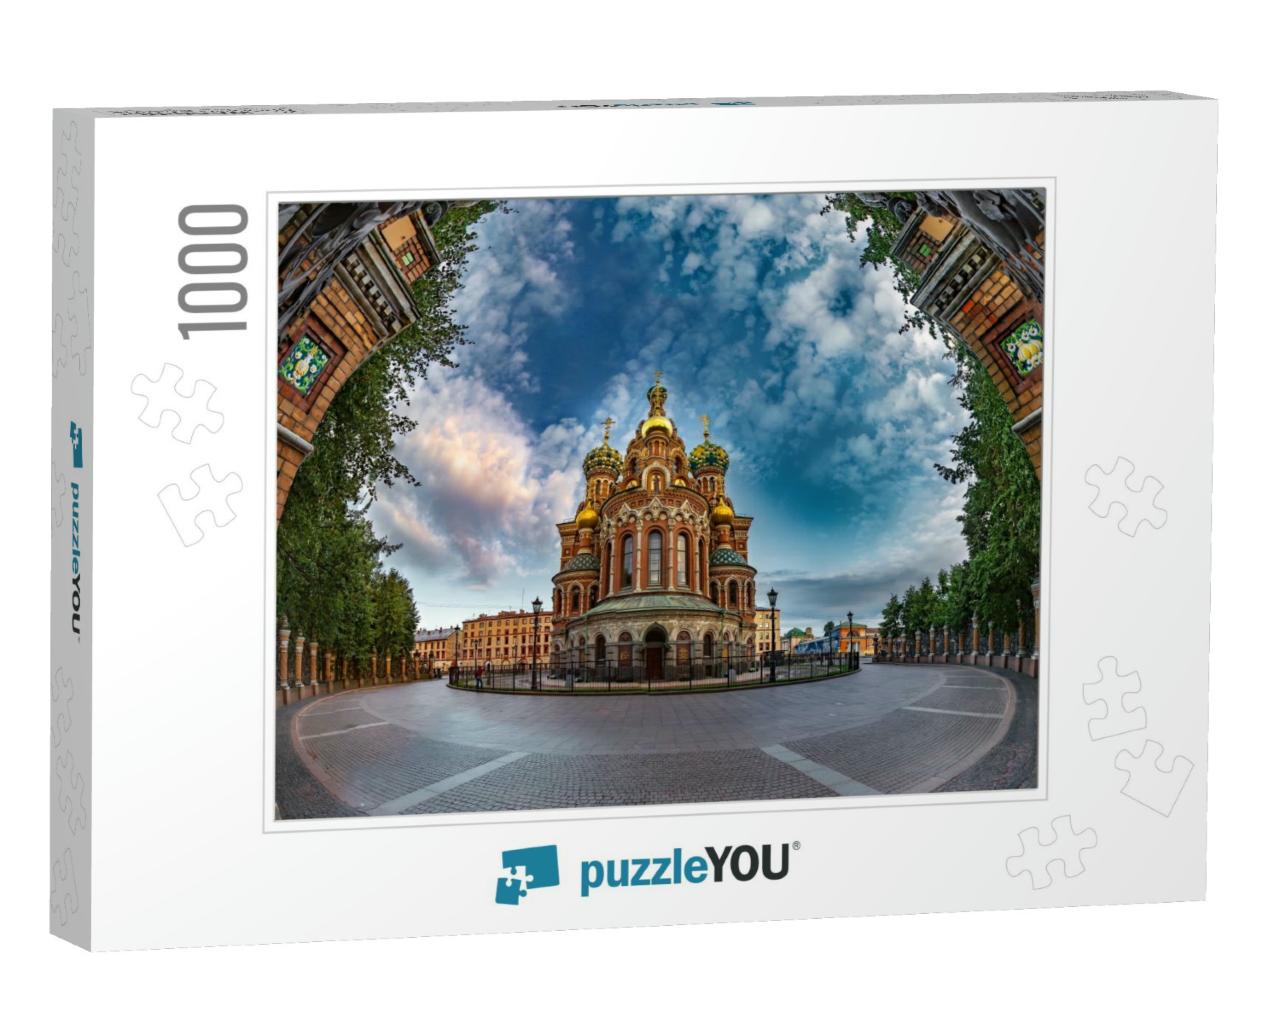 Savior on Spilled Blood. Orthodox Church. St. Petersburg... Jigsaw Puzzle with 1000 pieces